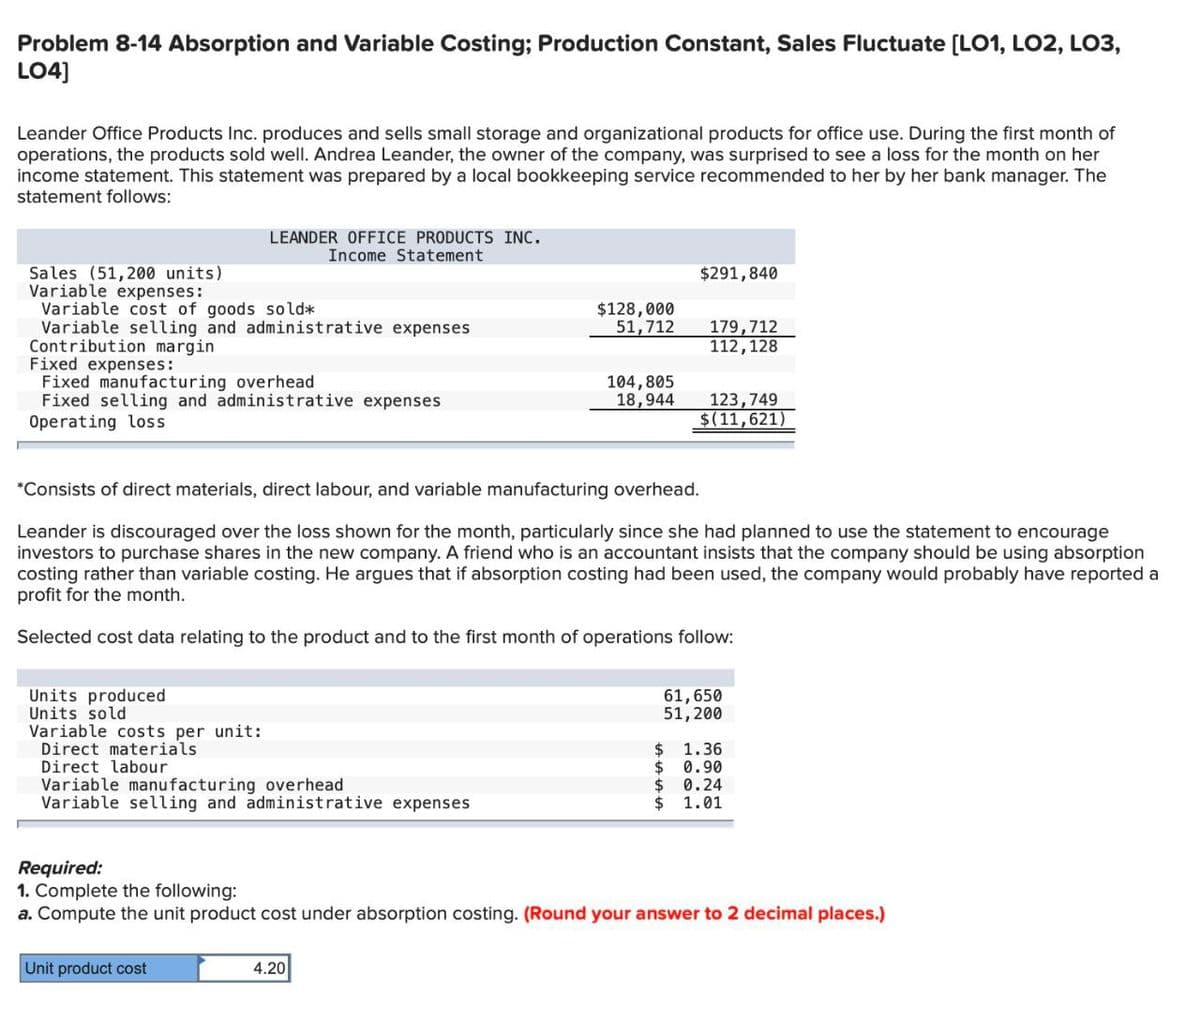 Problem 8-14 Absorption and Variable Costing; Production Constant, Sales Fluctuate [LO1, LO2, LO3,
LO4]
Leander Office Products Inc. produces and sells small storage and organizational products for office use. During the first month of
operations, the products sold well. Andrea Leander, the owner of the company, was surprised to see a loss for the month on her
income statement. This statement was prepared by a local bookkeeping service recommended to her by her bank manager. The
statement follows:
Sales (51,200 units)
Variable expenses:
Variable cost of goods sold*
Variable selling and administrative expenses
Contribution margin
Fixed expenses:
Fixed manufacturing overhead
Fixed selling and administrative expenses
Operating loss
LEANDER OFFICE PRODUCTS INC.
Income Statement
Units produced
Units sold
Variable costs per unit:
Direct materials.
Direct labour
Variable manufacturing overhead
Variable selling and administrative expenses
Unit product cost
$128,000
51,712
*Consists of direct materials, direct labour, and variable manufacturing overhead.
Leander is discouraged over the loss shown for the month, particularly since she had planned to use the statement to encourage
investors to purchase shares in the new company. A friend who is an accountant insists that the company should be using absorption
costing rather than variable costing. He argues that if absorption costing had been used, the company would probably have reported a
profit for the month.
Selected cost data relating to the product and to the first month of operations follow:
104,805
18,944
4.20
$291,840
179,712
112, 128
123,749
$(11,621)
61, 650
51, 200
$ 1.36
$
0.90
Required:
1. Complete the following:
a. Compute the unit product cost under absorption costing. (Round your answer to 2 decimal places.)
$
0.24
$ 1.01